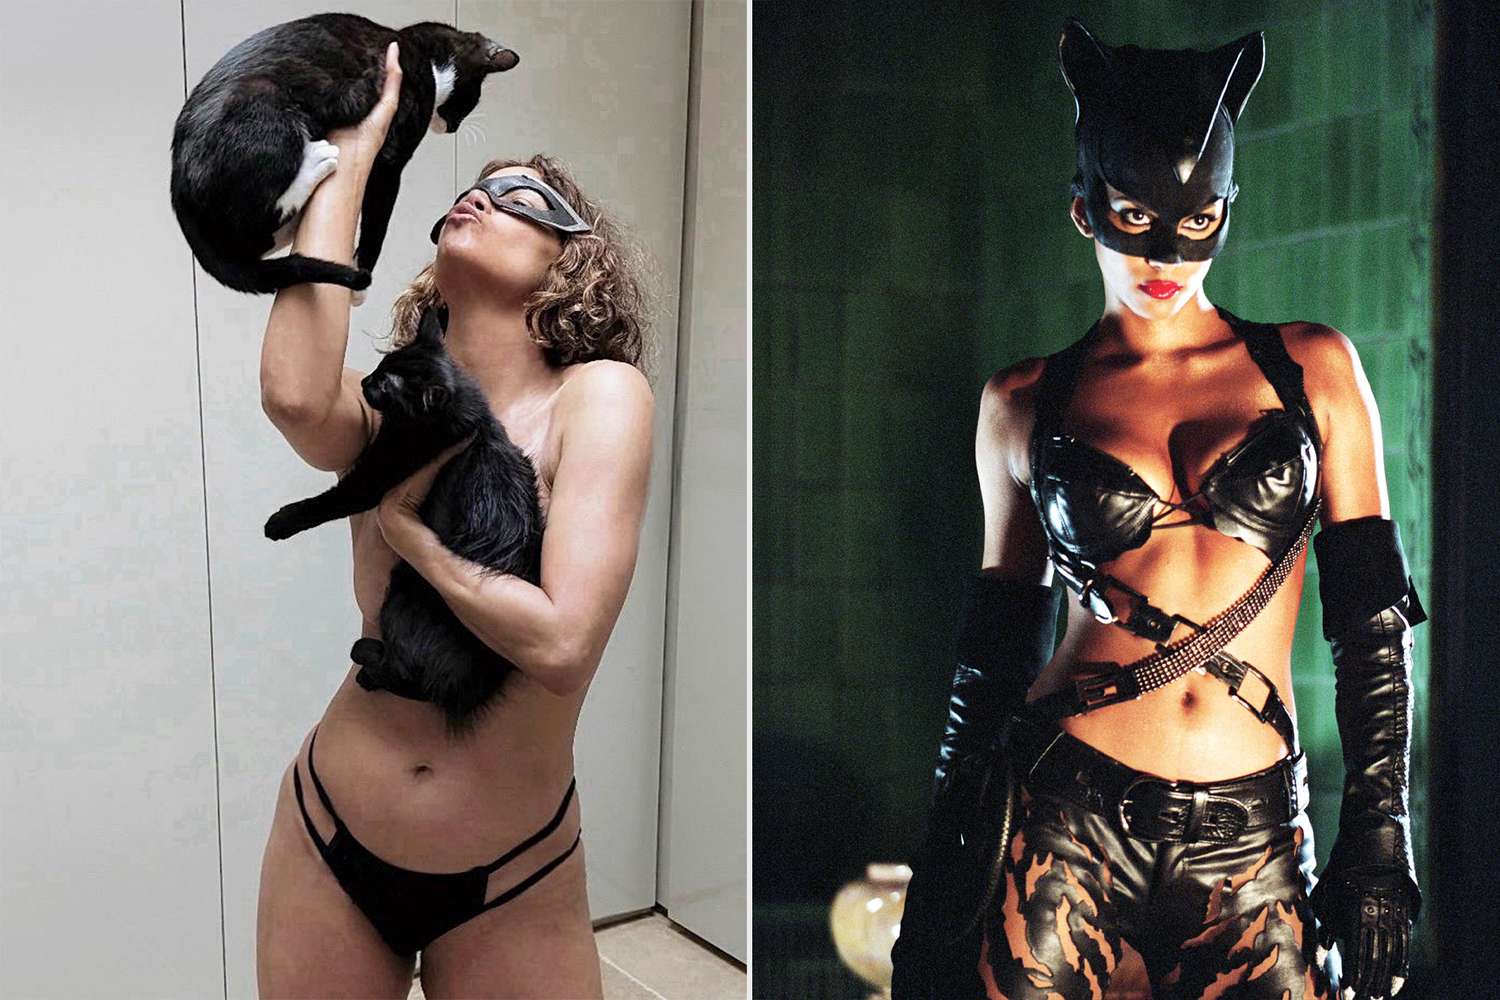 See Halle Berry's topless photos with kittens for 'Catwoman' 20th anniversary: 'Meow!'